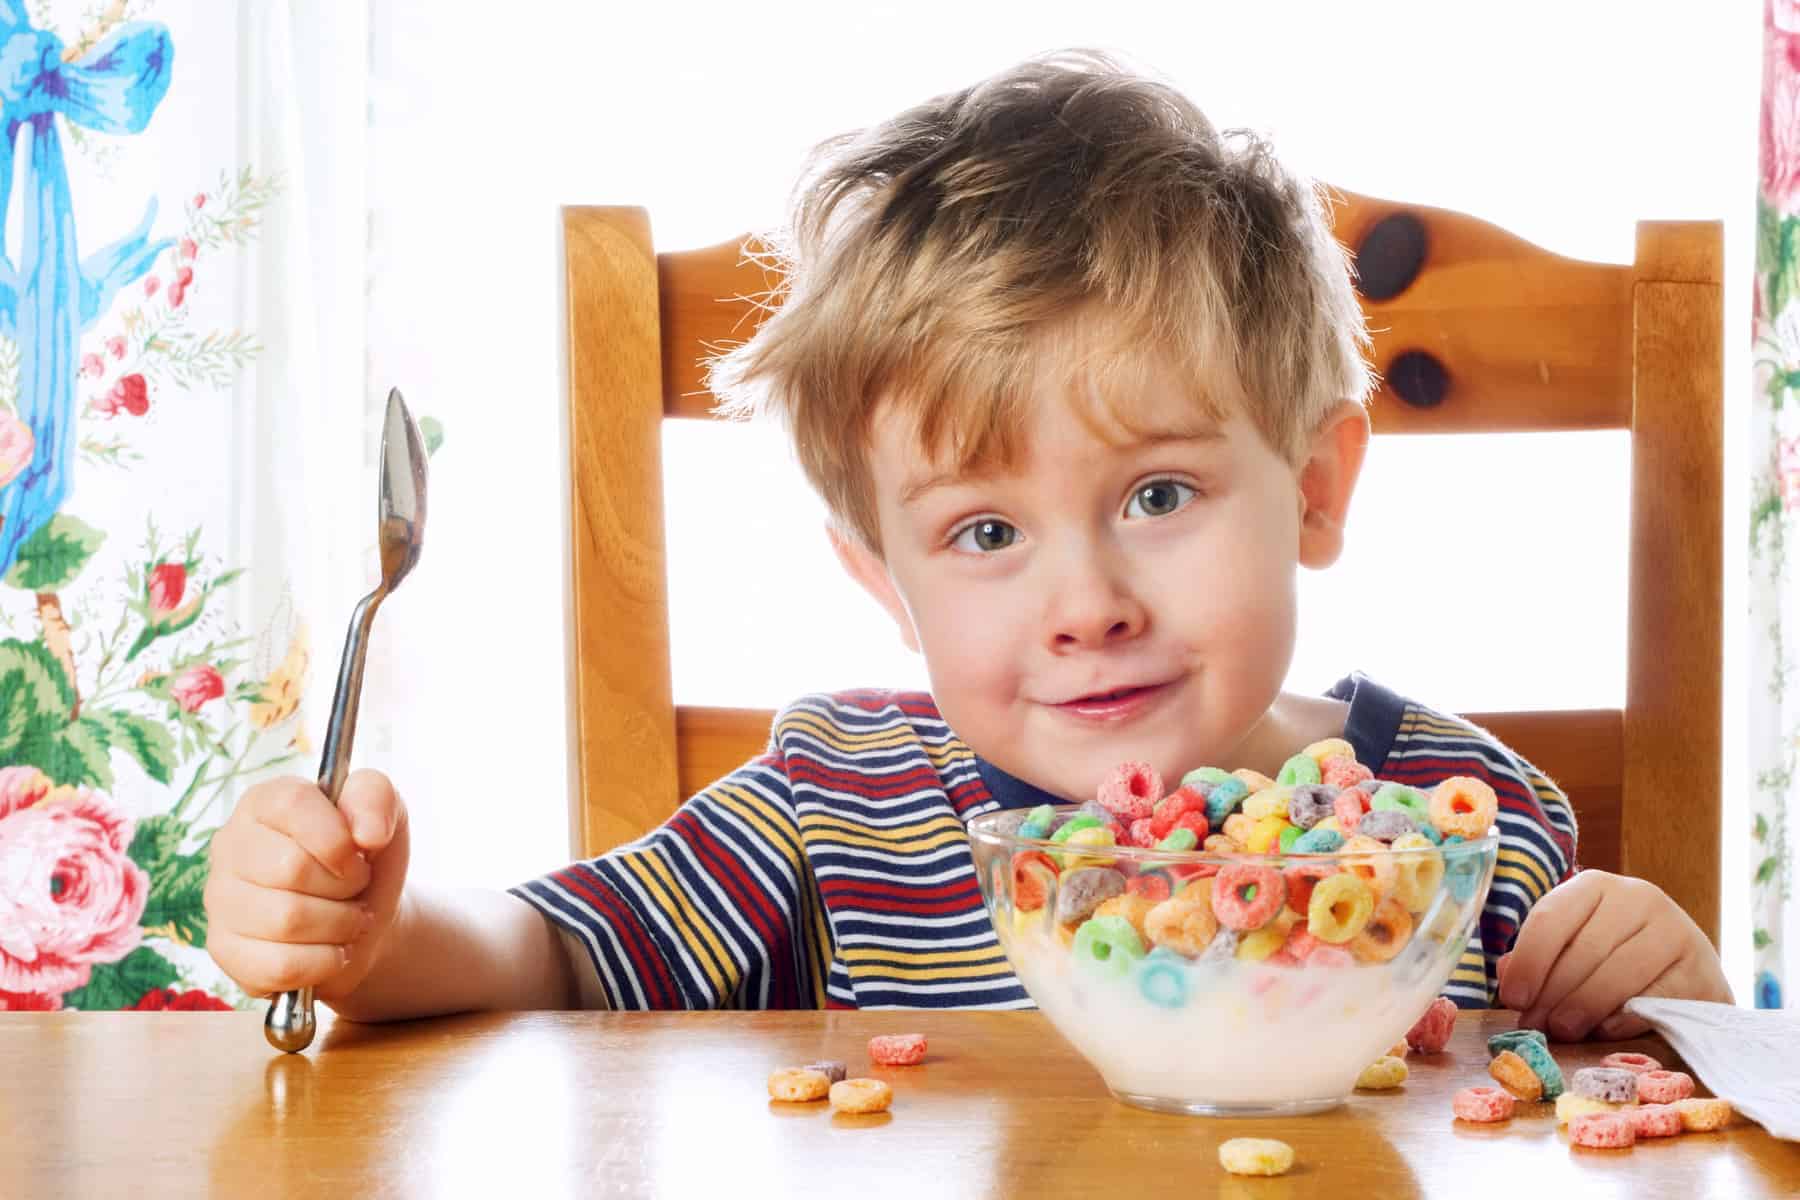 5 Ways For Parents To Become Savvy About Hidden Added Sugars